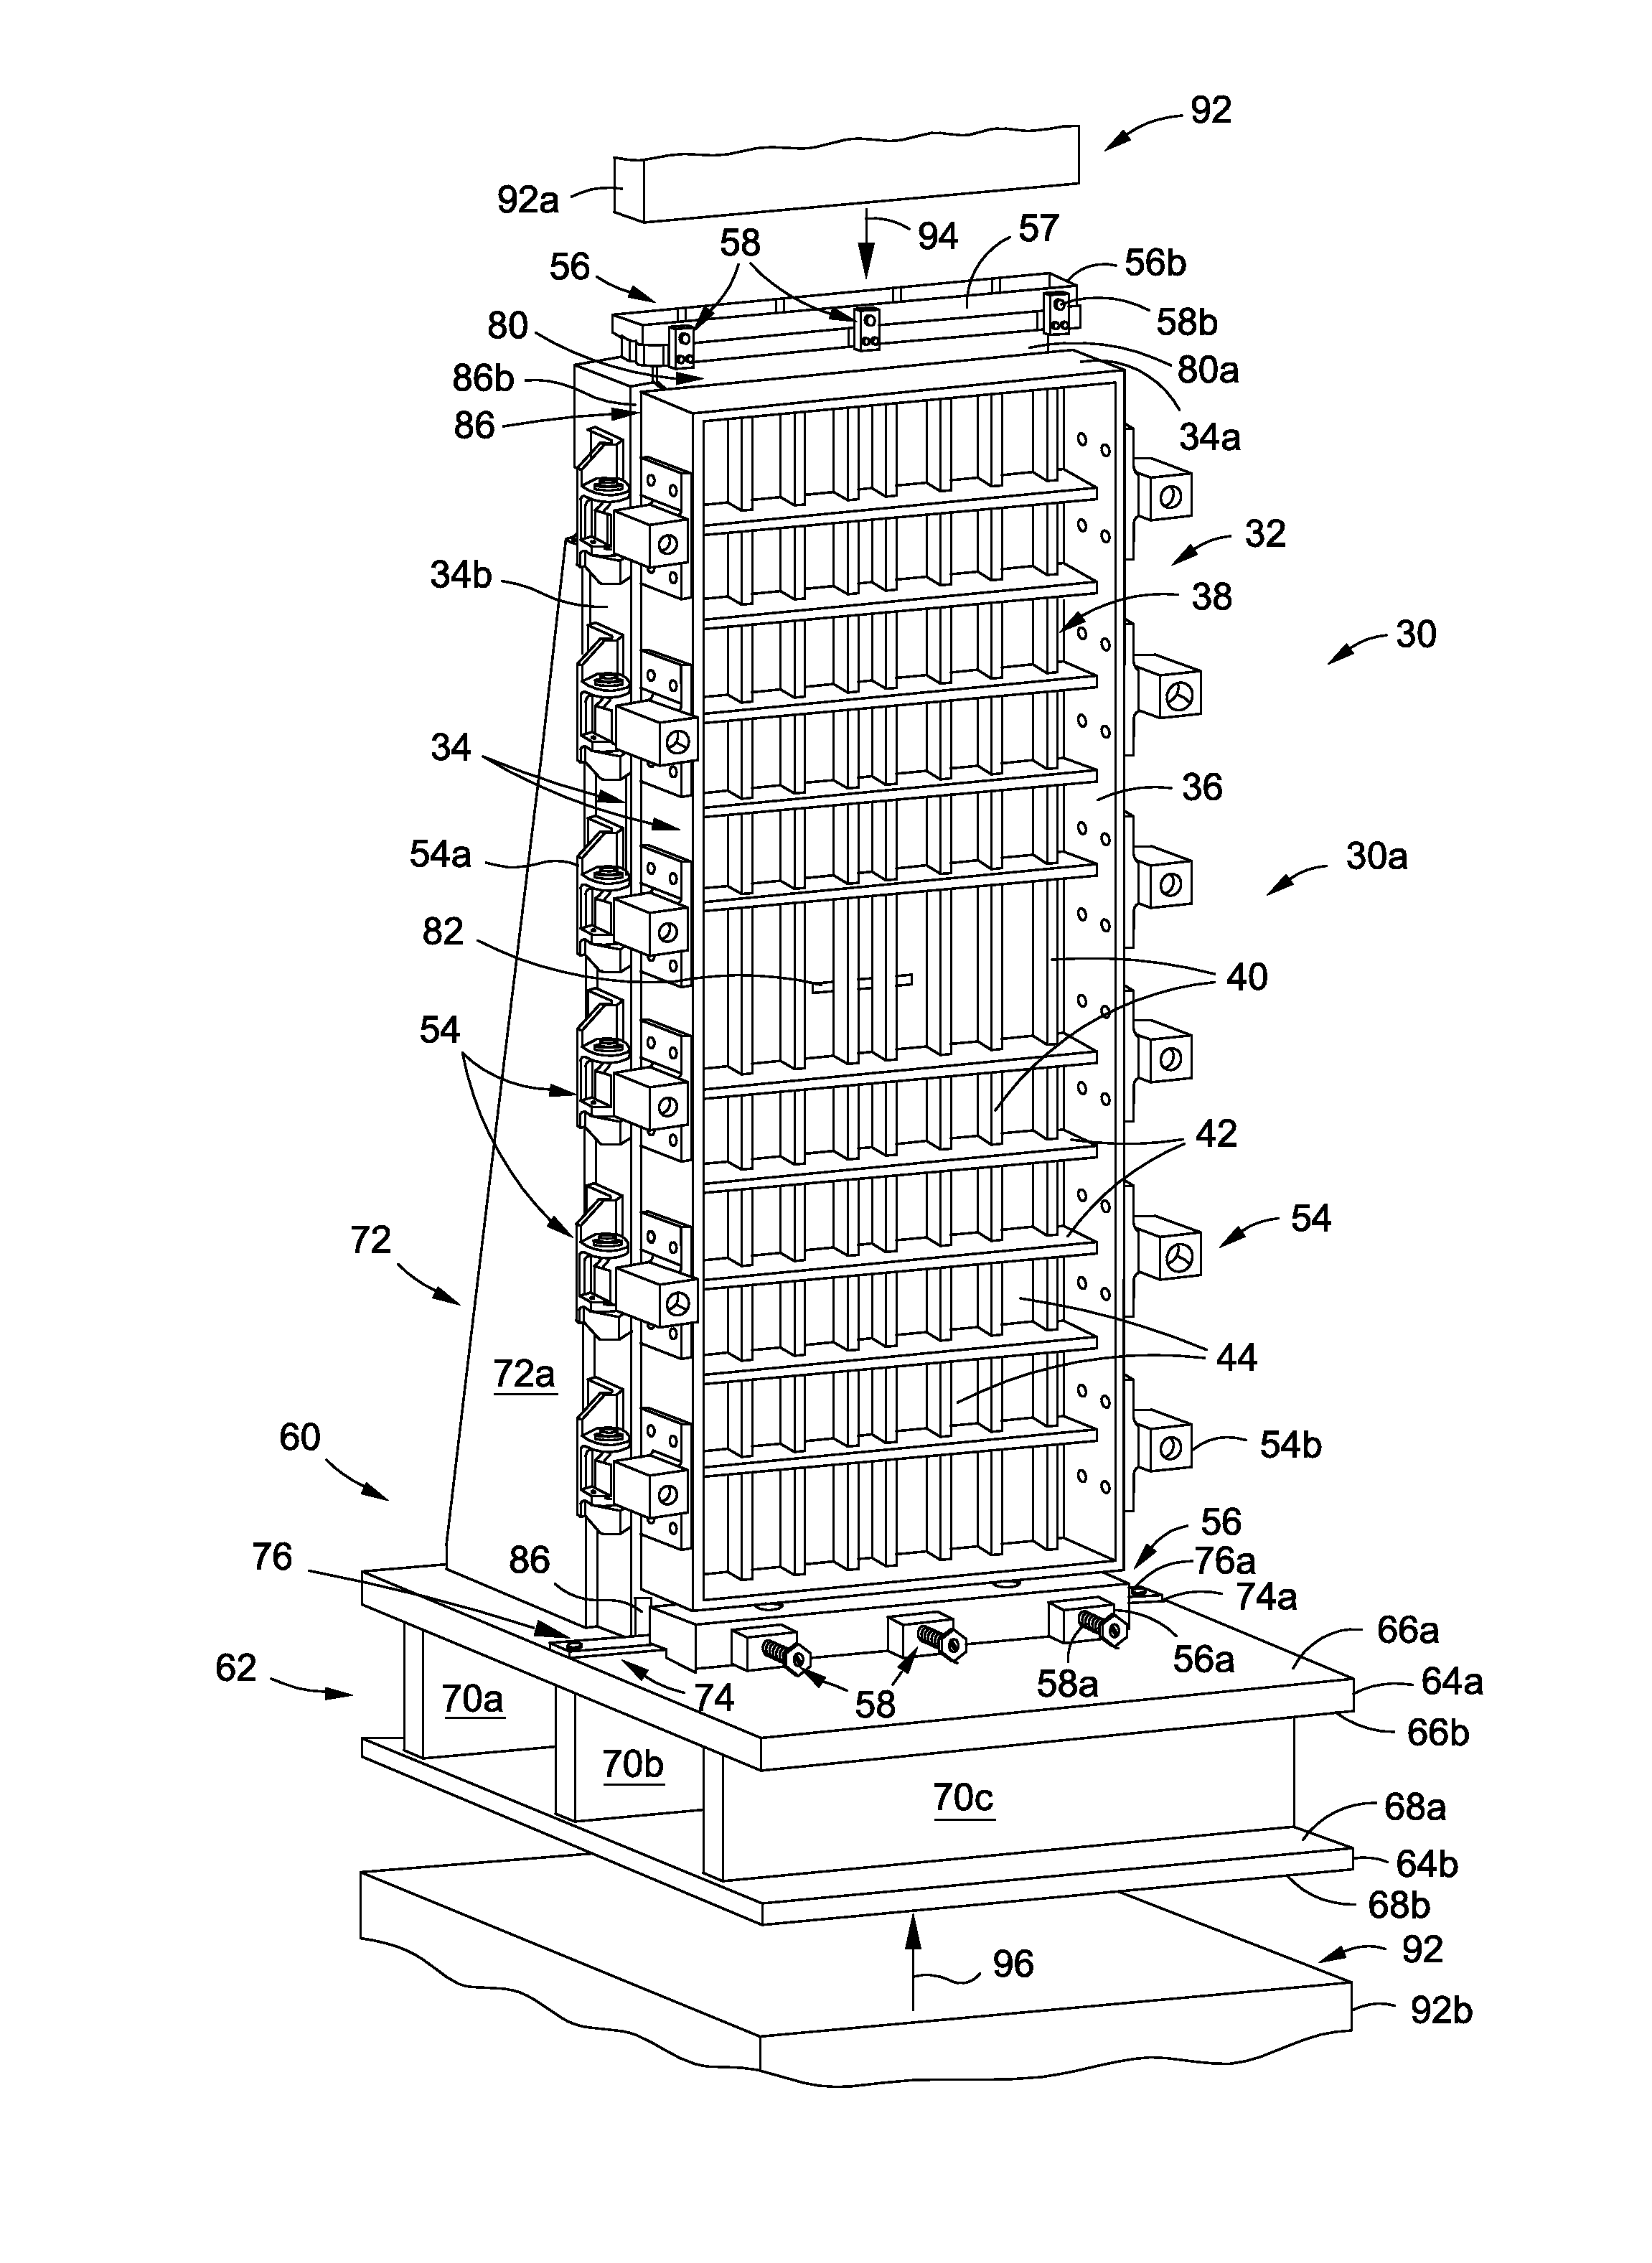 Apparatus, system and method for compression testing of test specimens